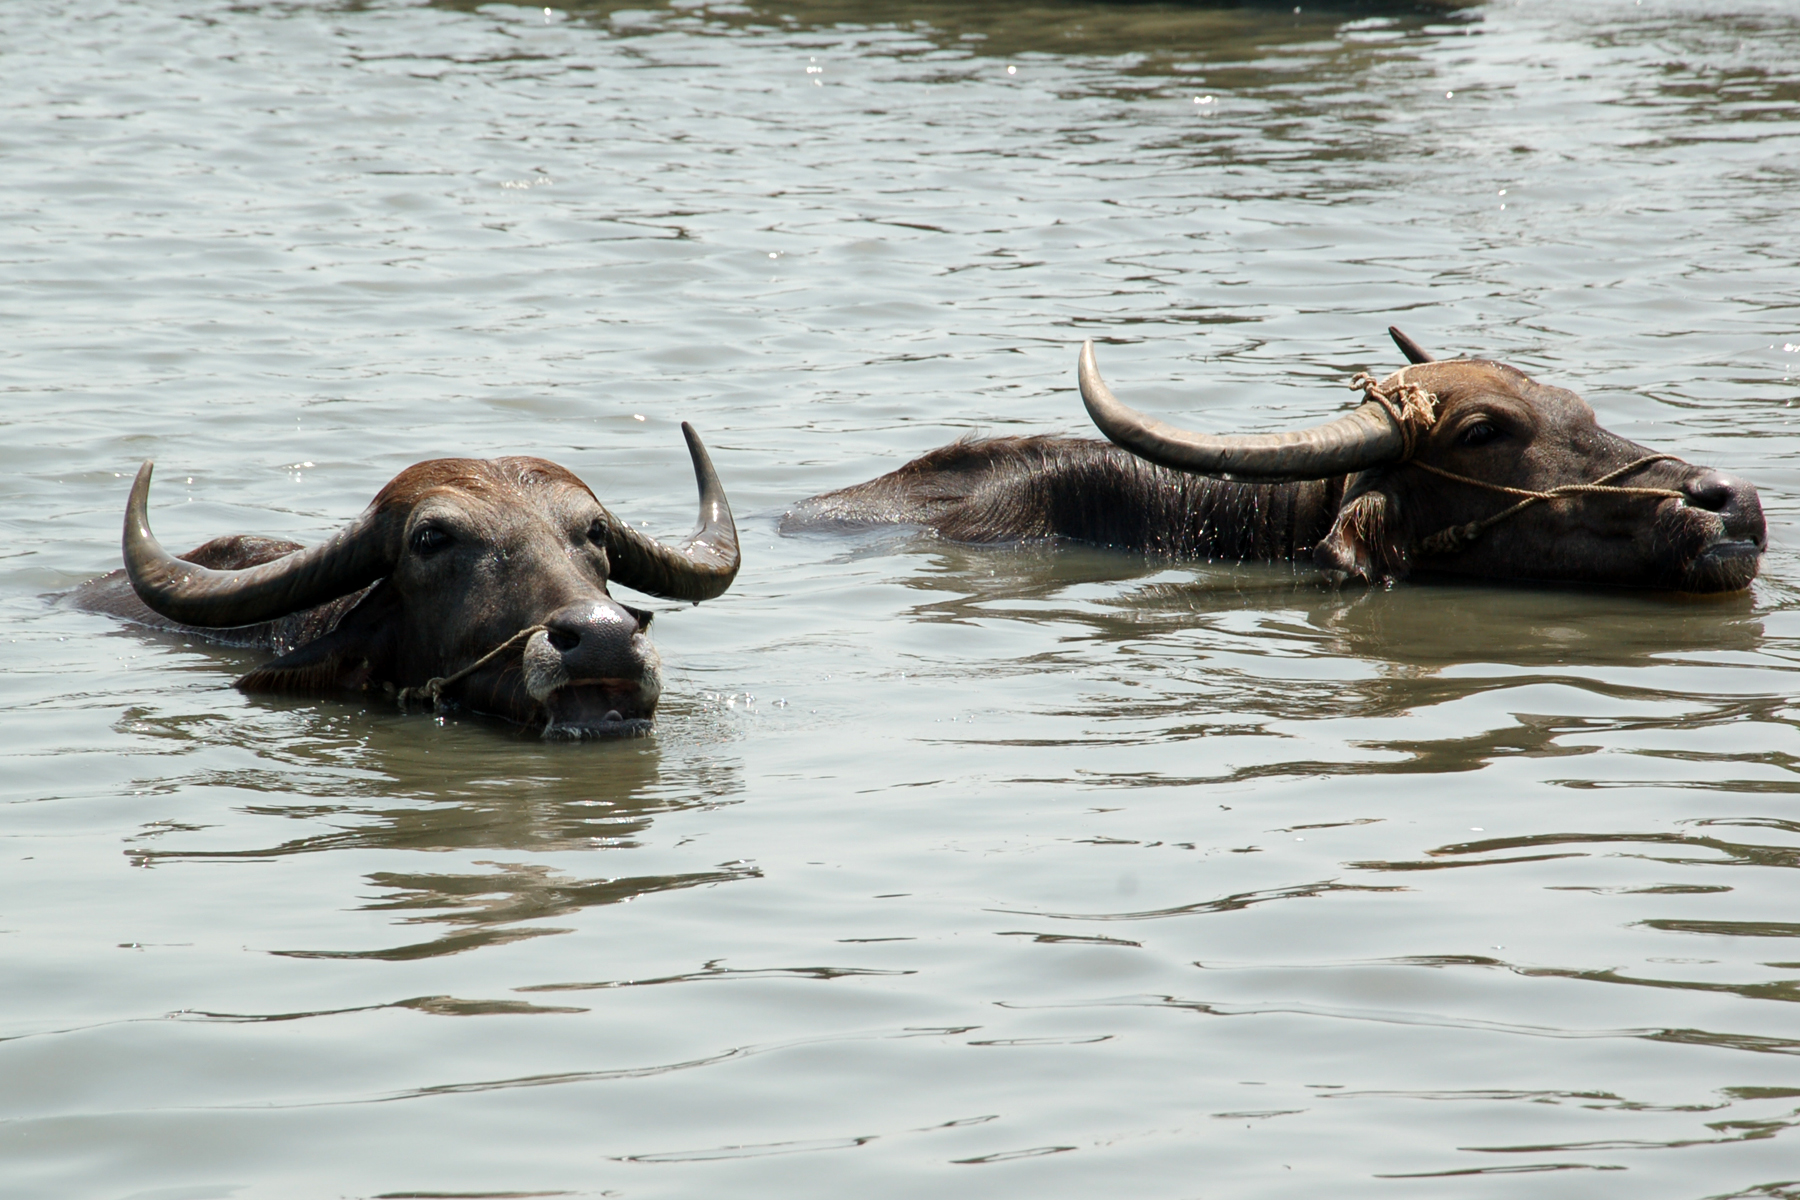 two animals are in the water swimming together